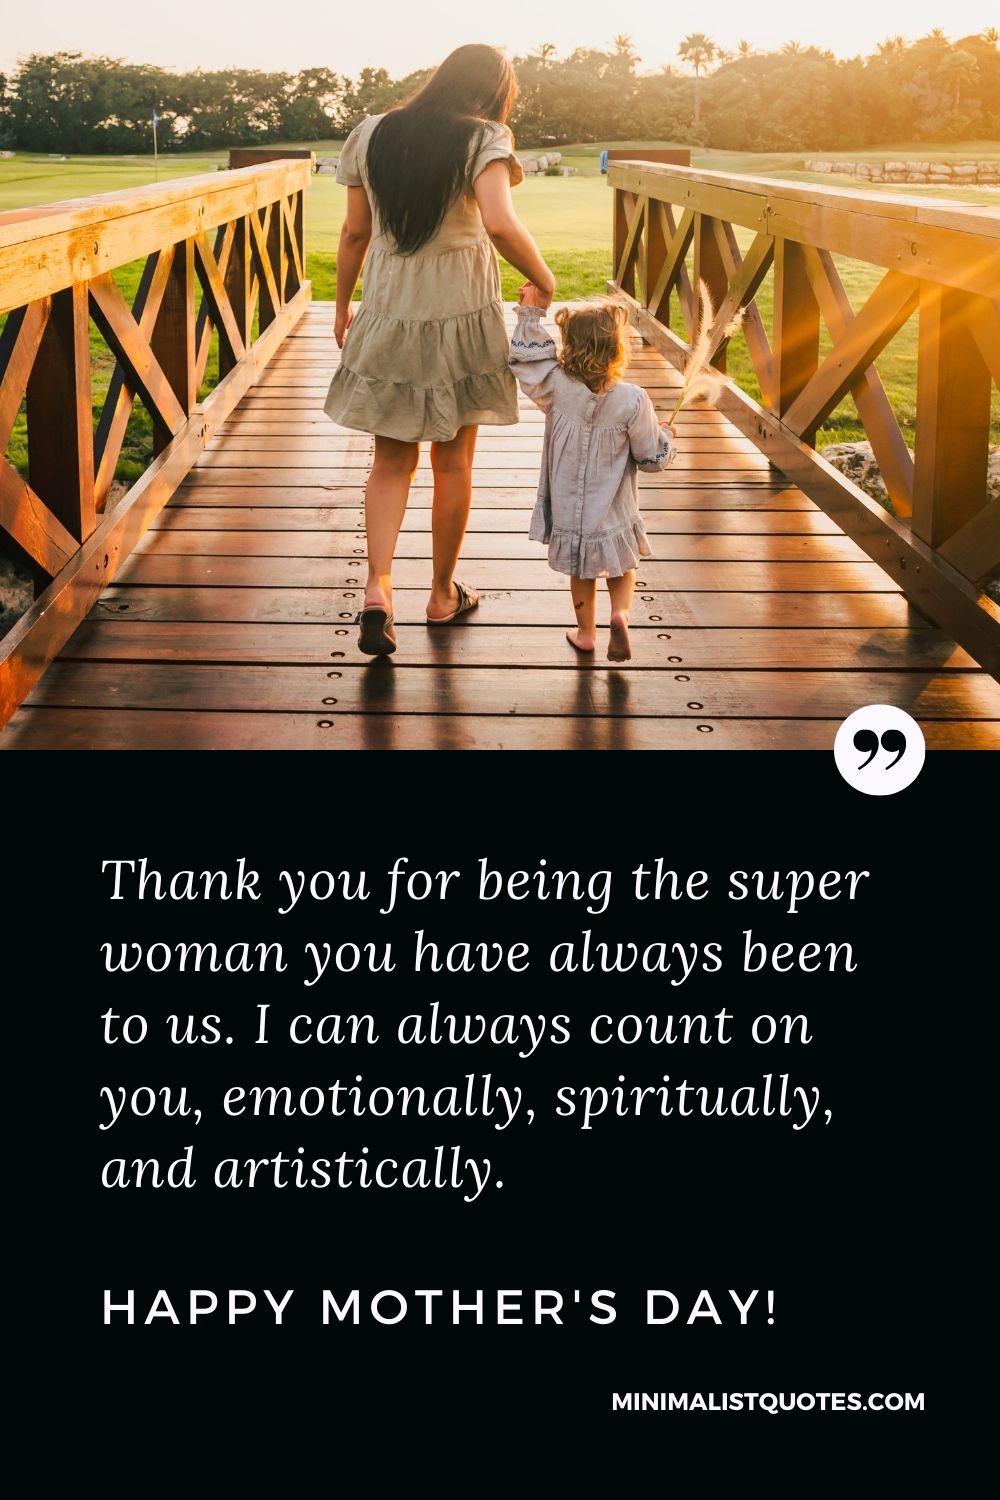 Mother's Day Quote, Wish & Message With Image: Thank you for being the superwoman you have always been to us. I can always count on you, emotionally, spiritually, and artistically. Happy Mother's Day!